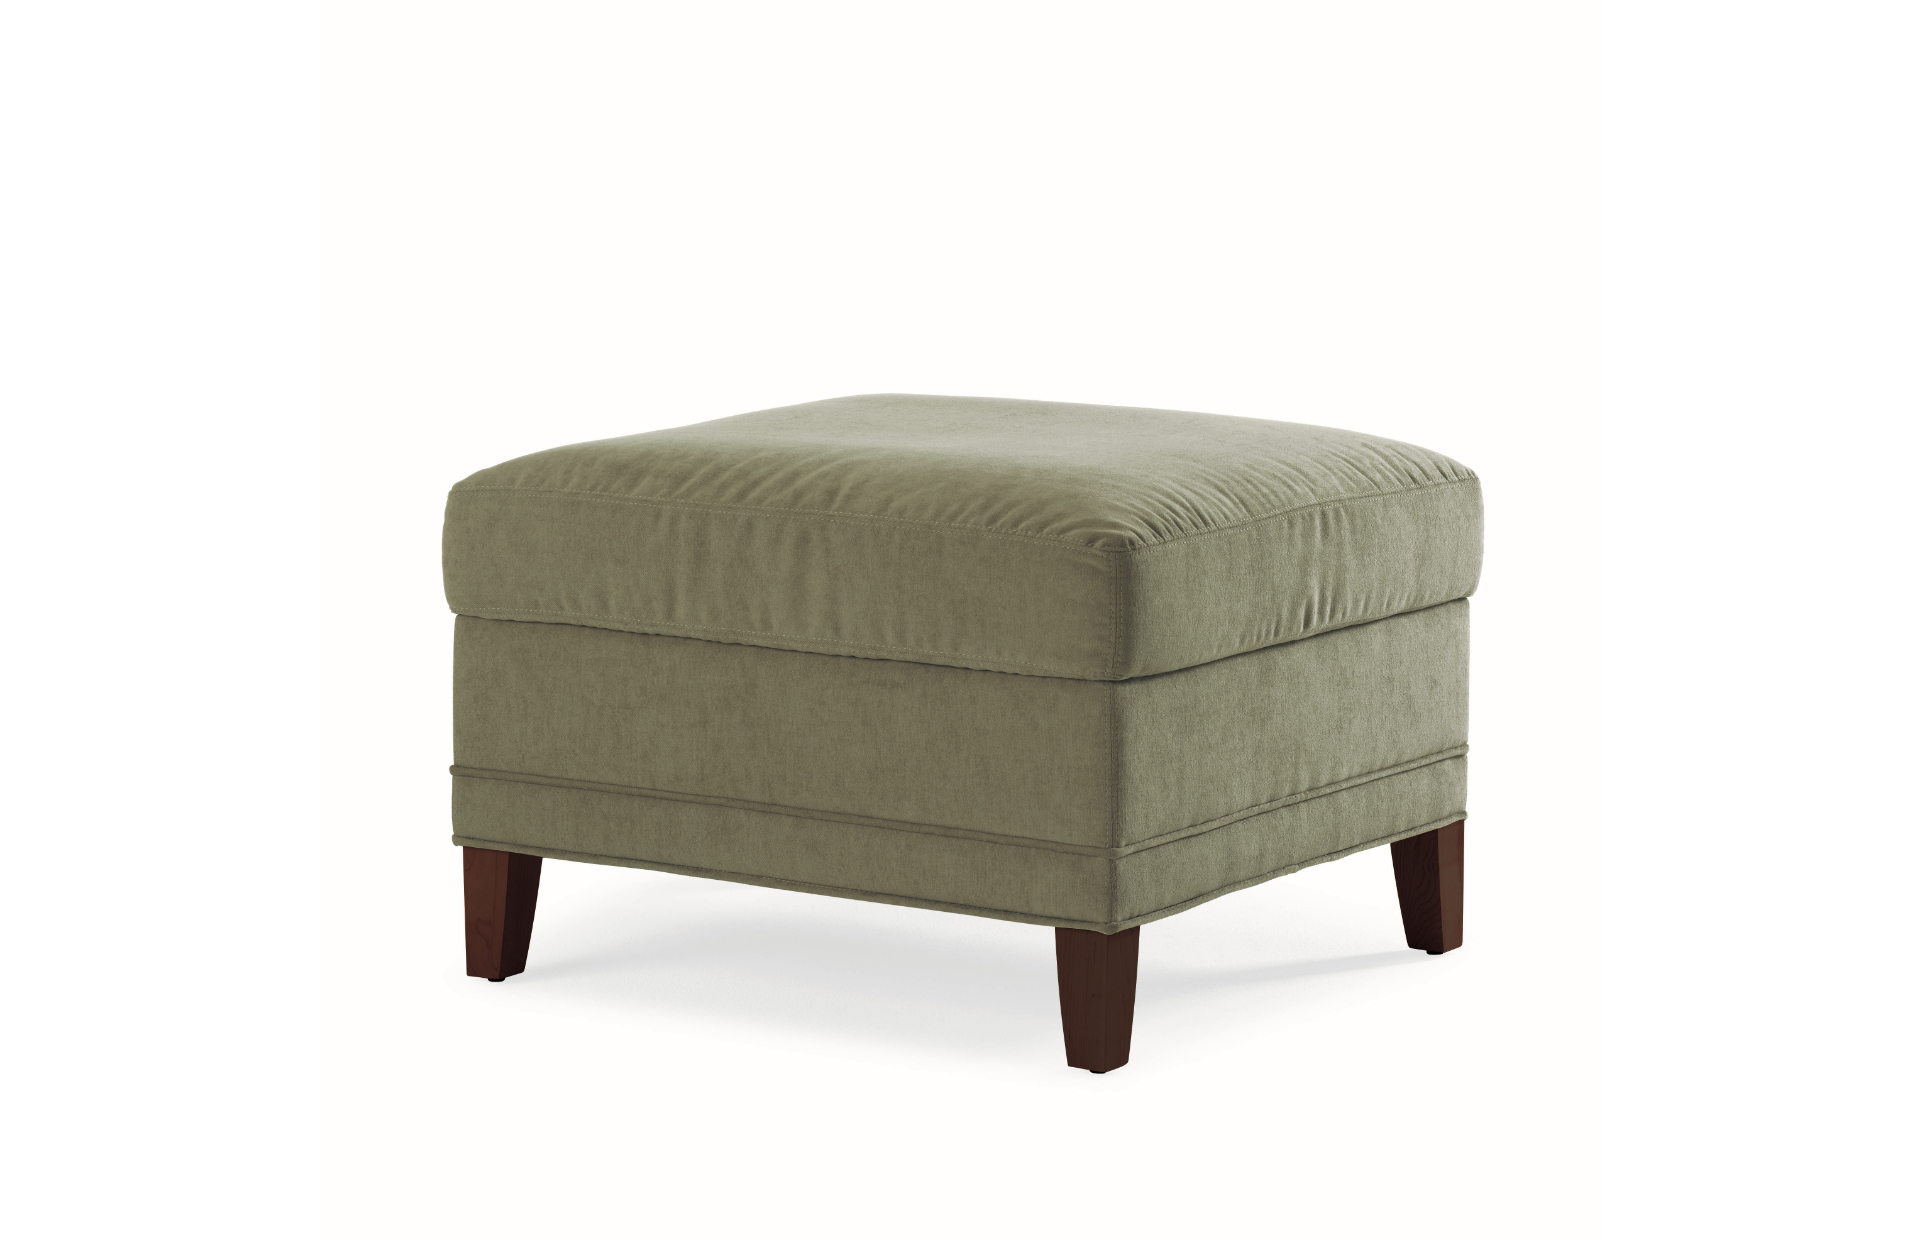 Light green suede office ottoman with wooden legs